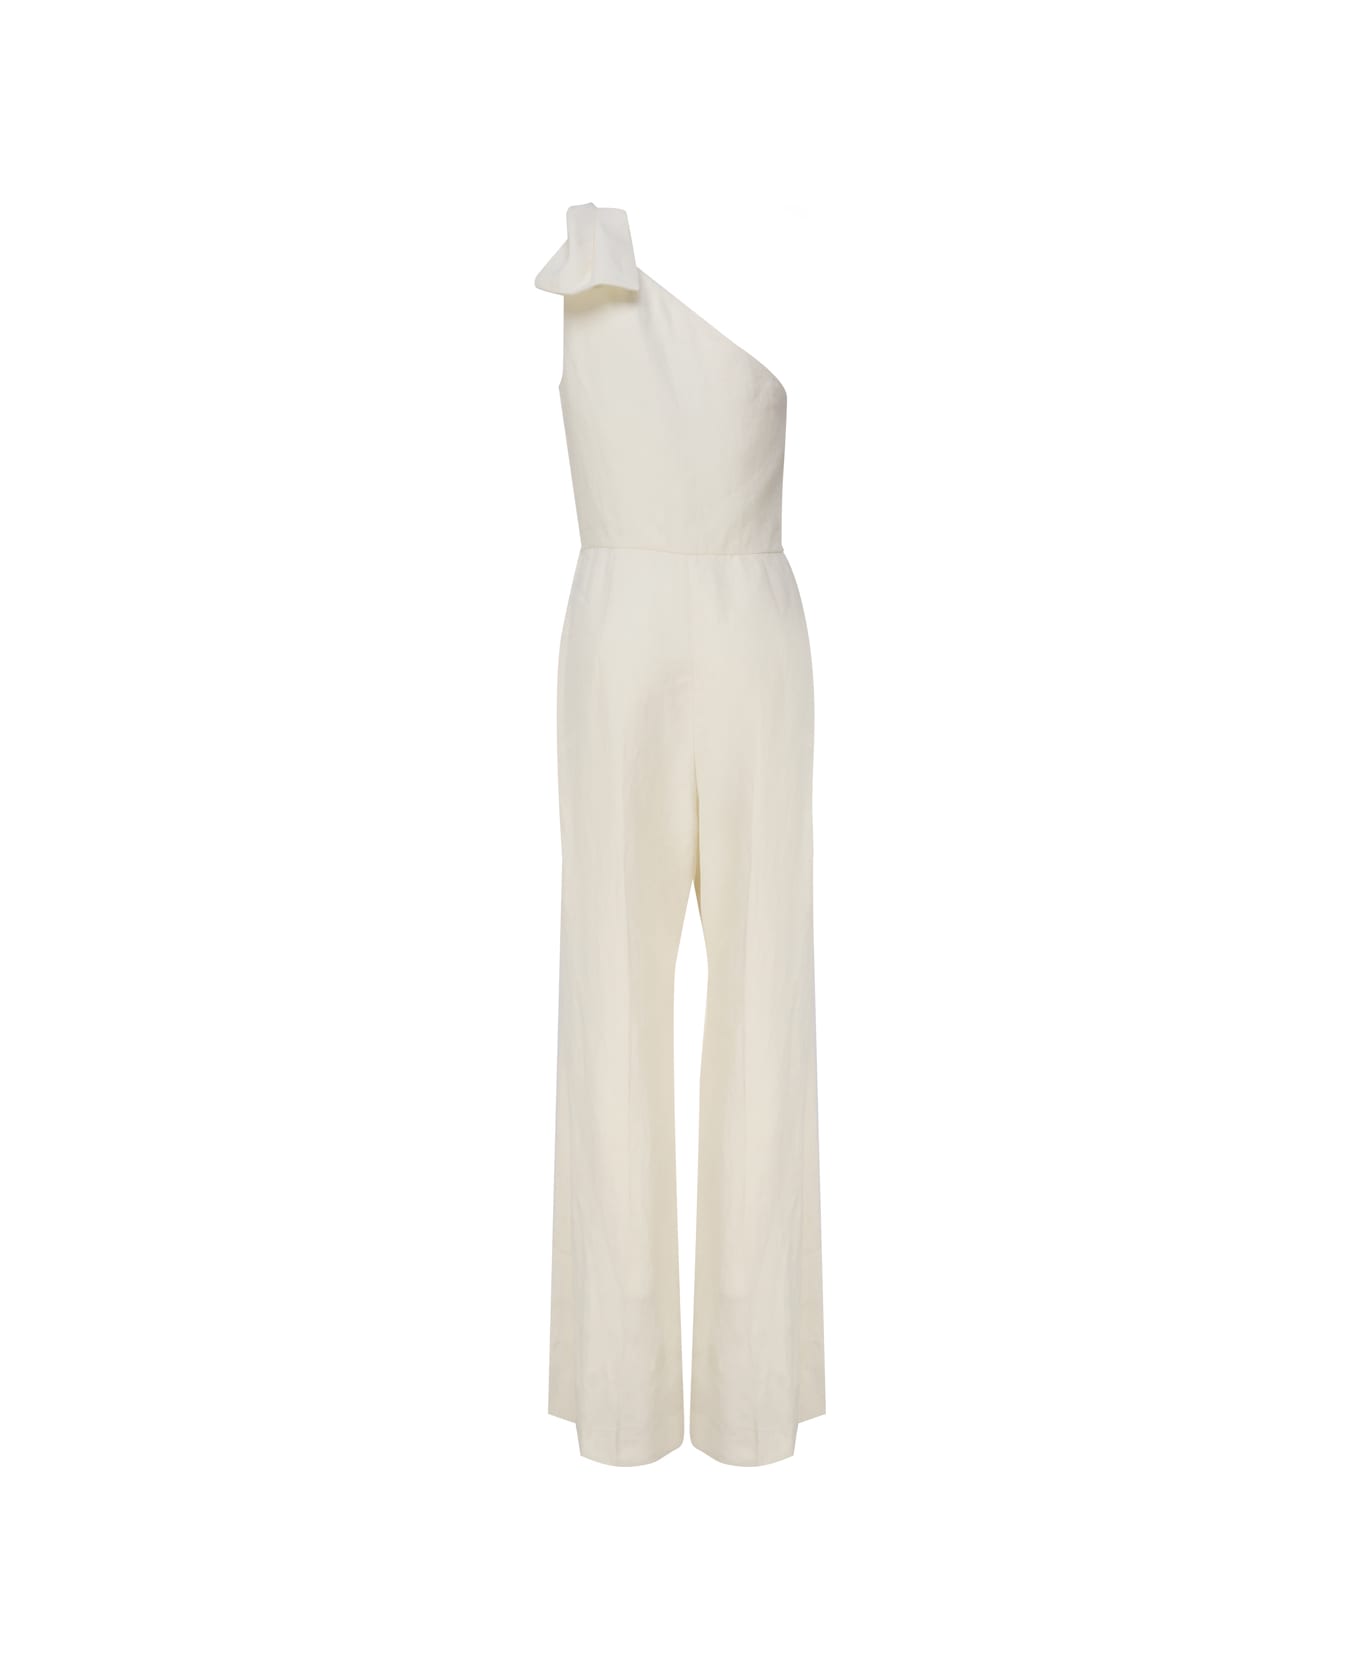 Chloé Linen Dress With Bows - White